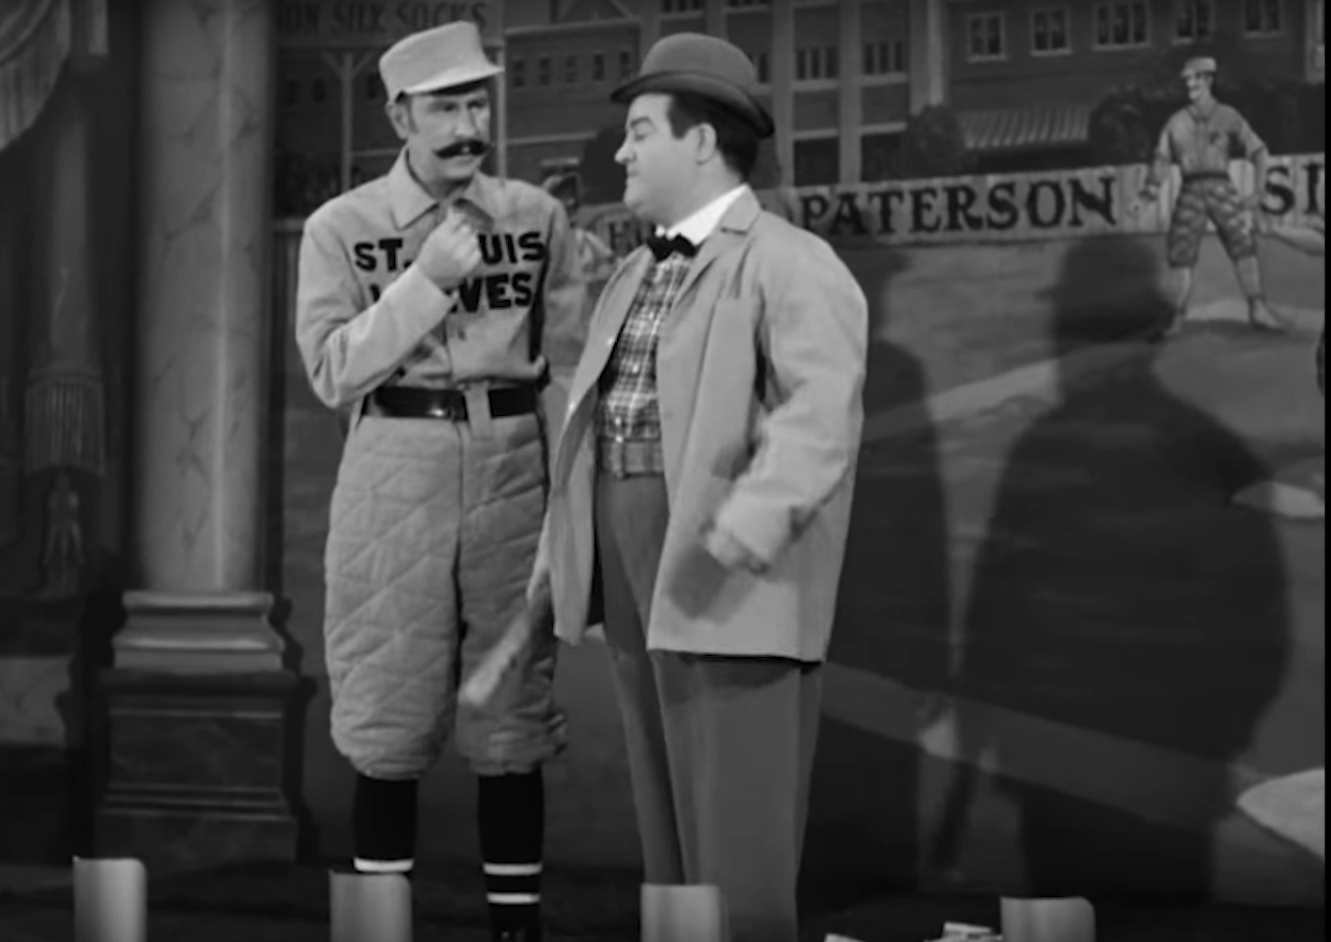 Image of Abbott and Costello performing their famous routine, "Who's on First?" Costello, a native of Paterson, liked to pay homage to his hometown, as seen on an outfield fence sign.  Image: Cropped screen capture from  The Naughty Nineties, ©1945, Universal Pictures. Consistent with Fair Use Doctrine.